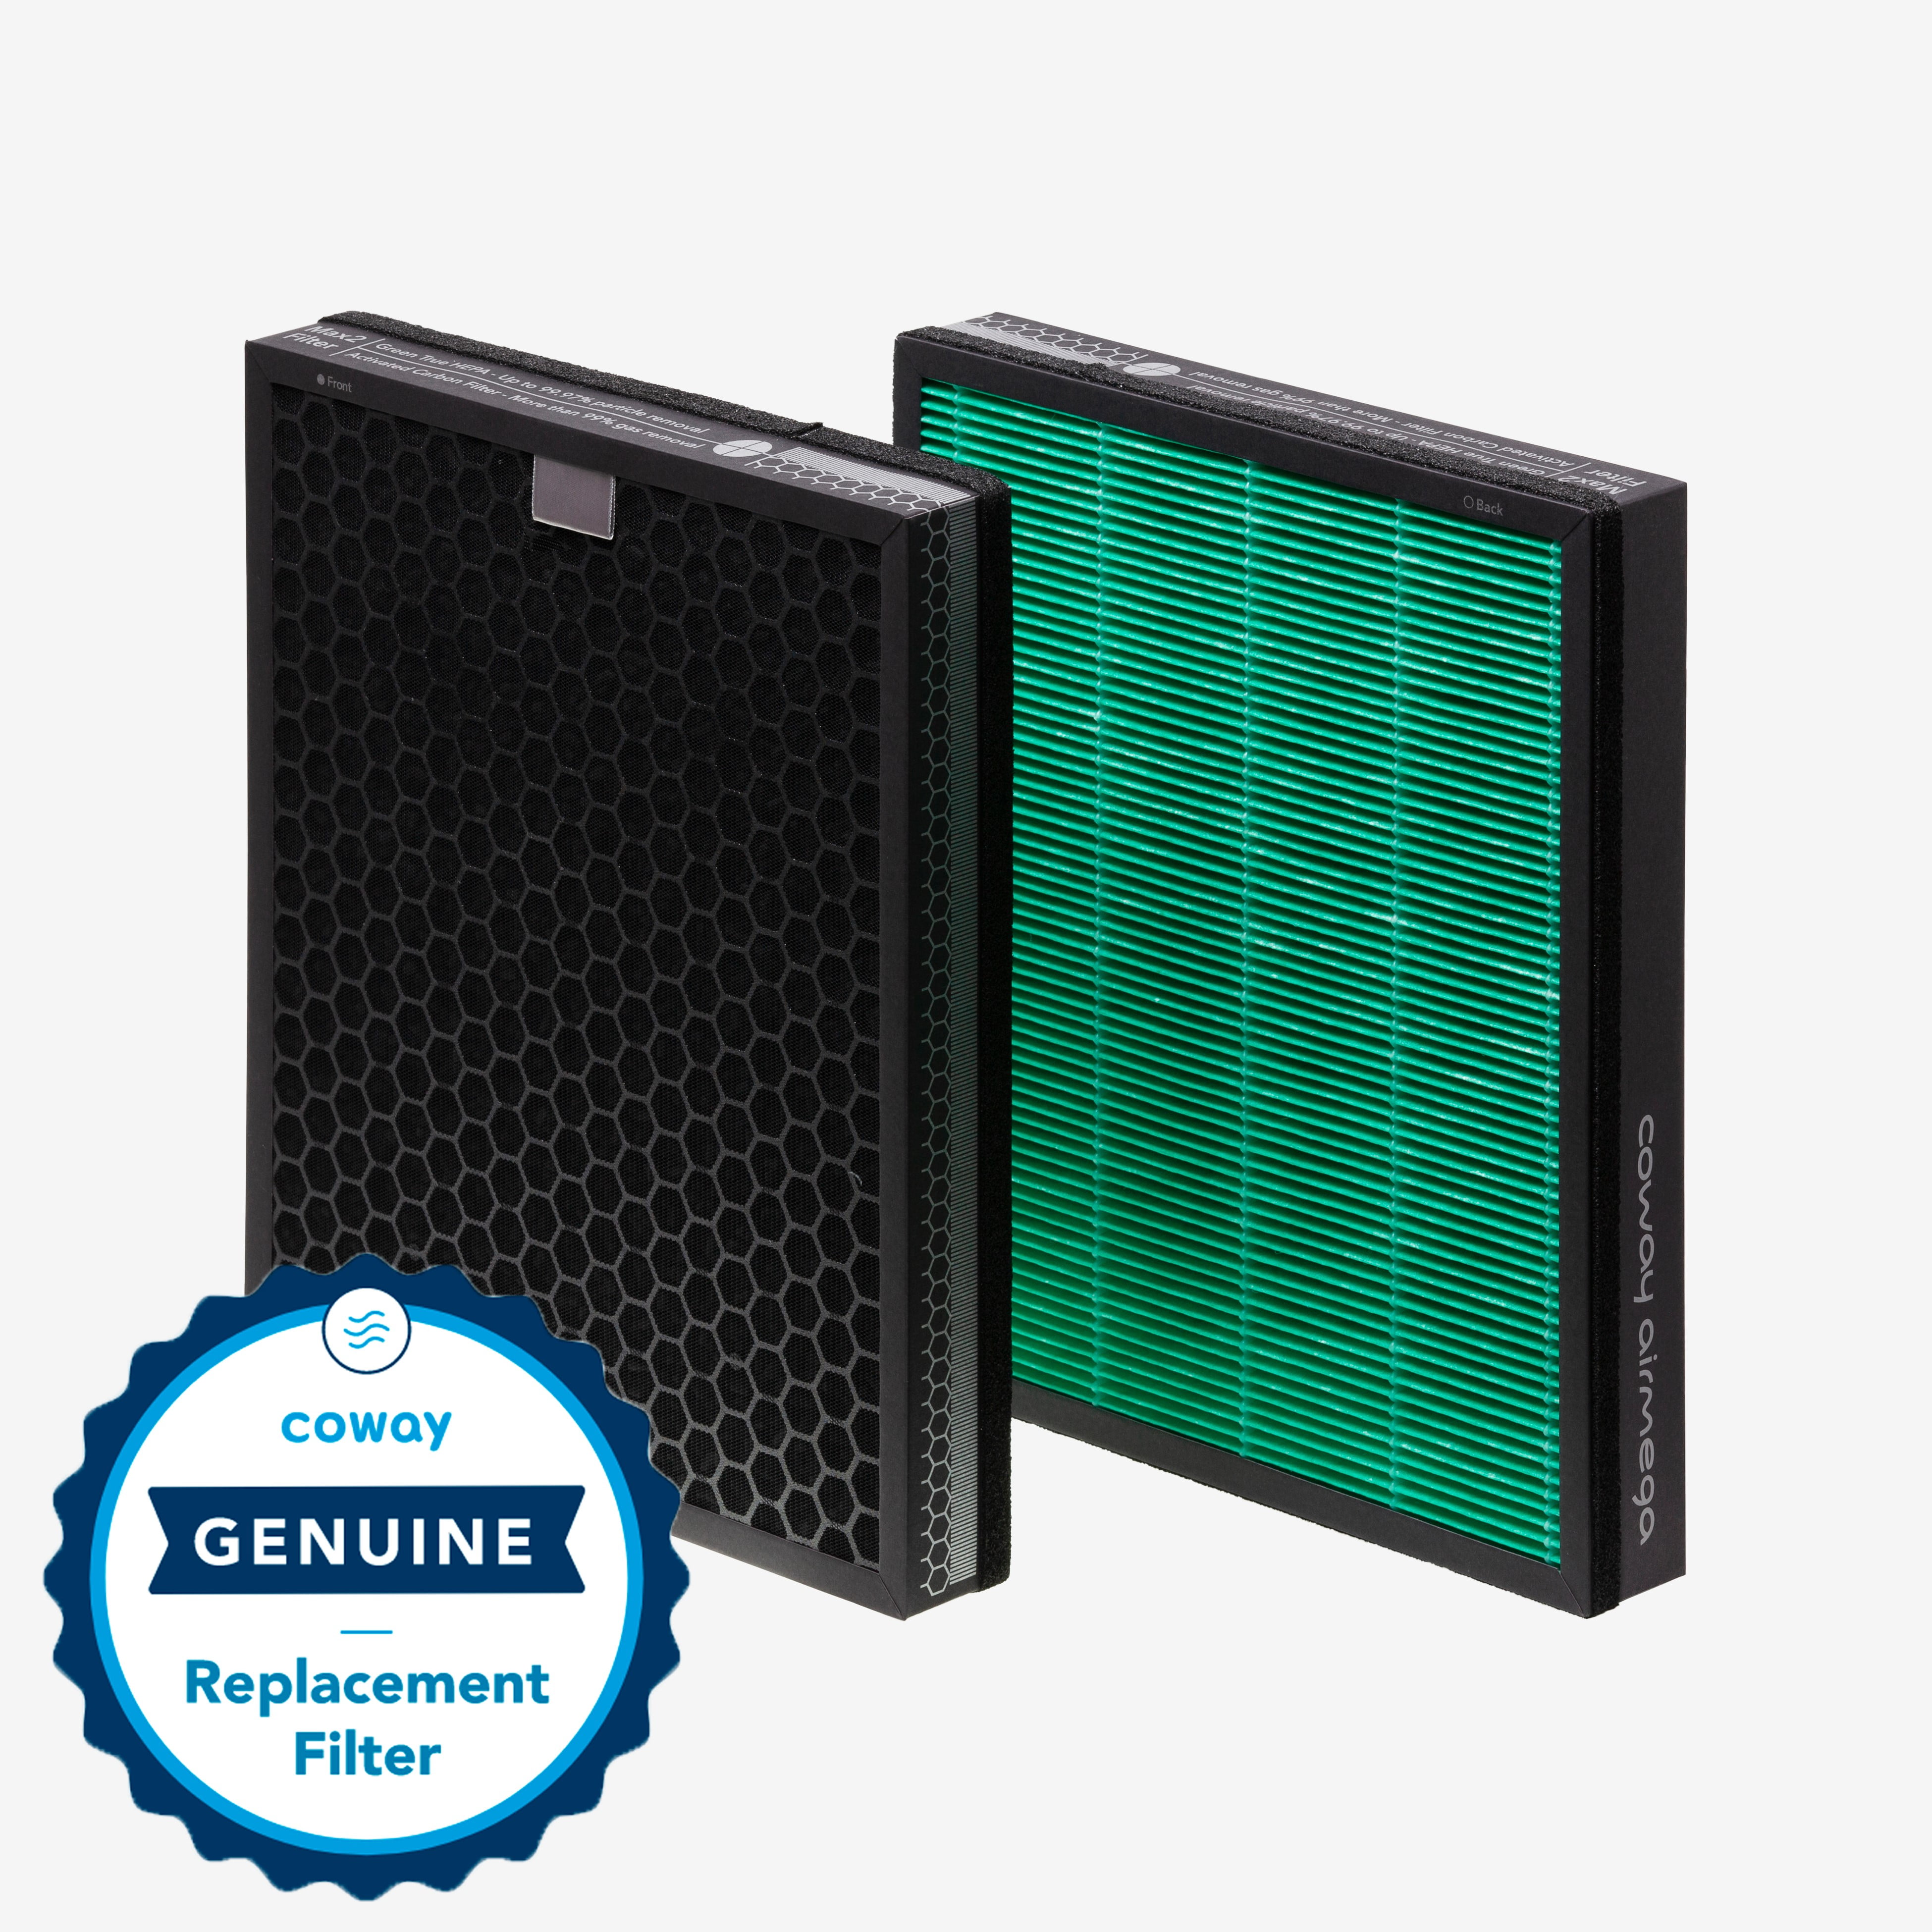 2 HEPA Filters for AIRMEGA Max 2 Air Purifier 400/400S 3111735 by LifeSupplyUSA